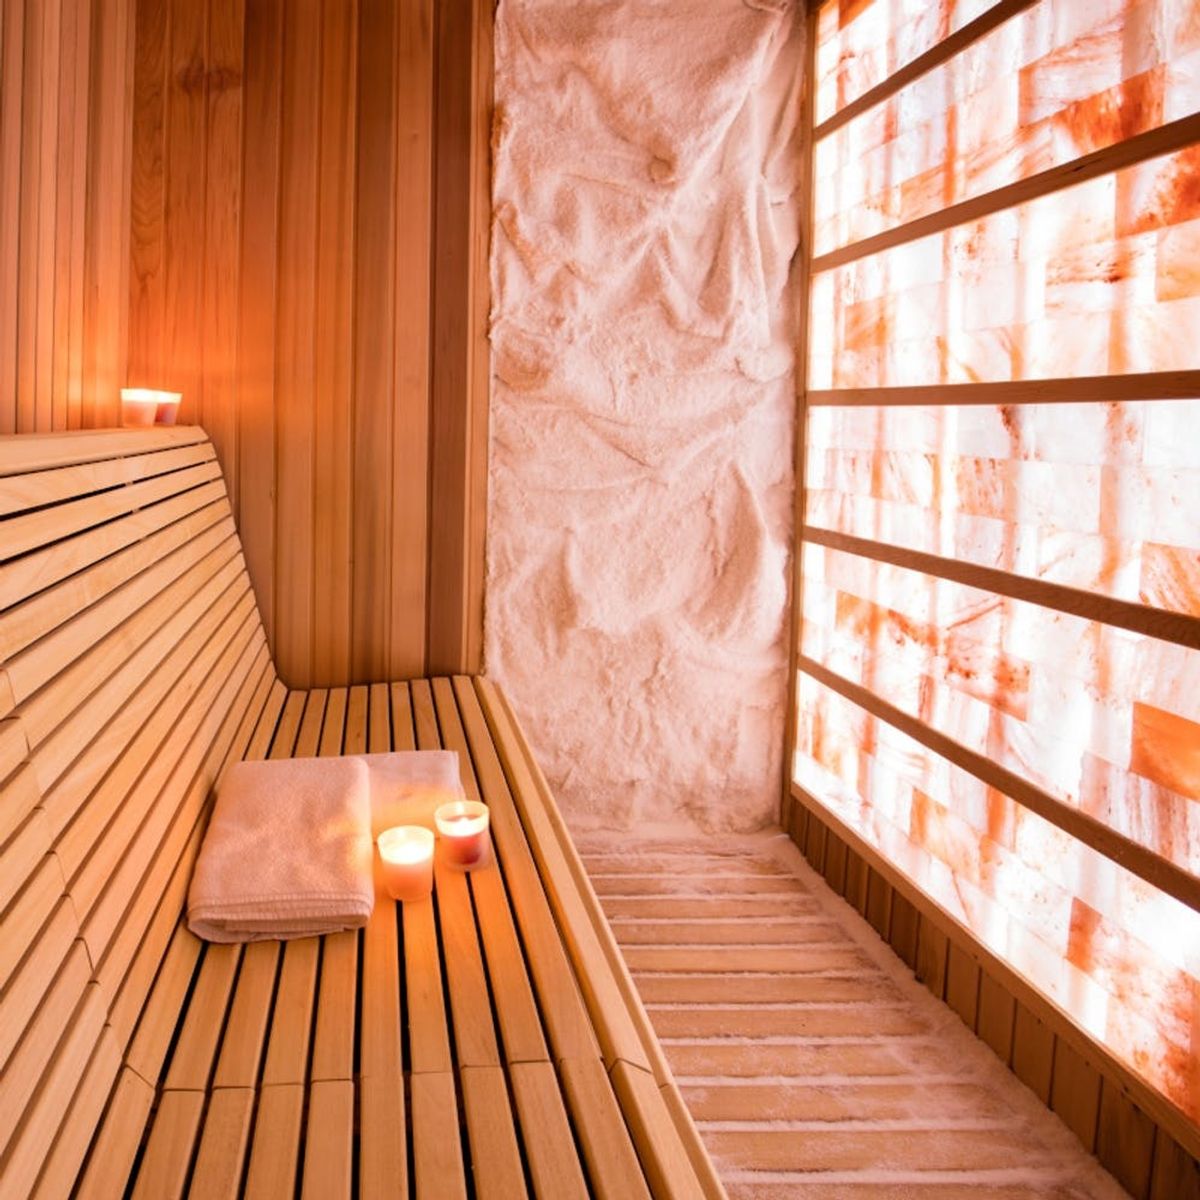 What’s the Deal With Halotherapy and Salt Rooms?